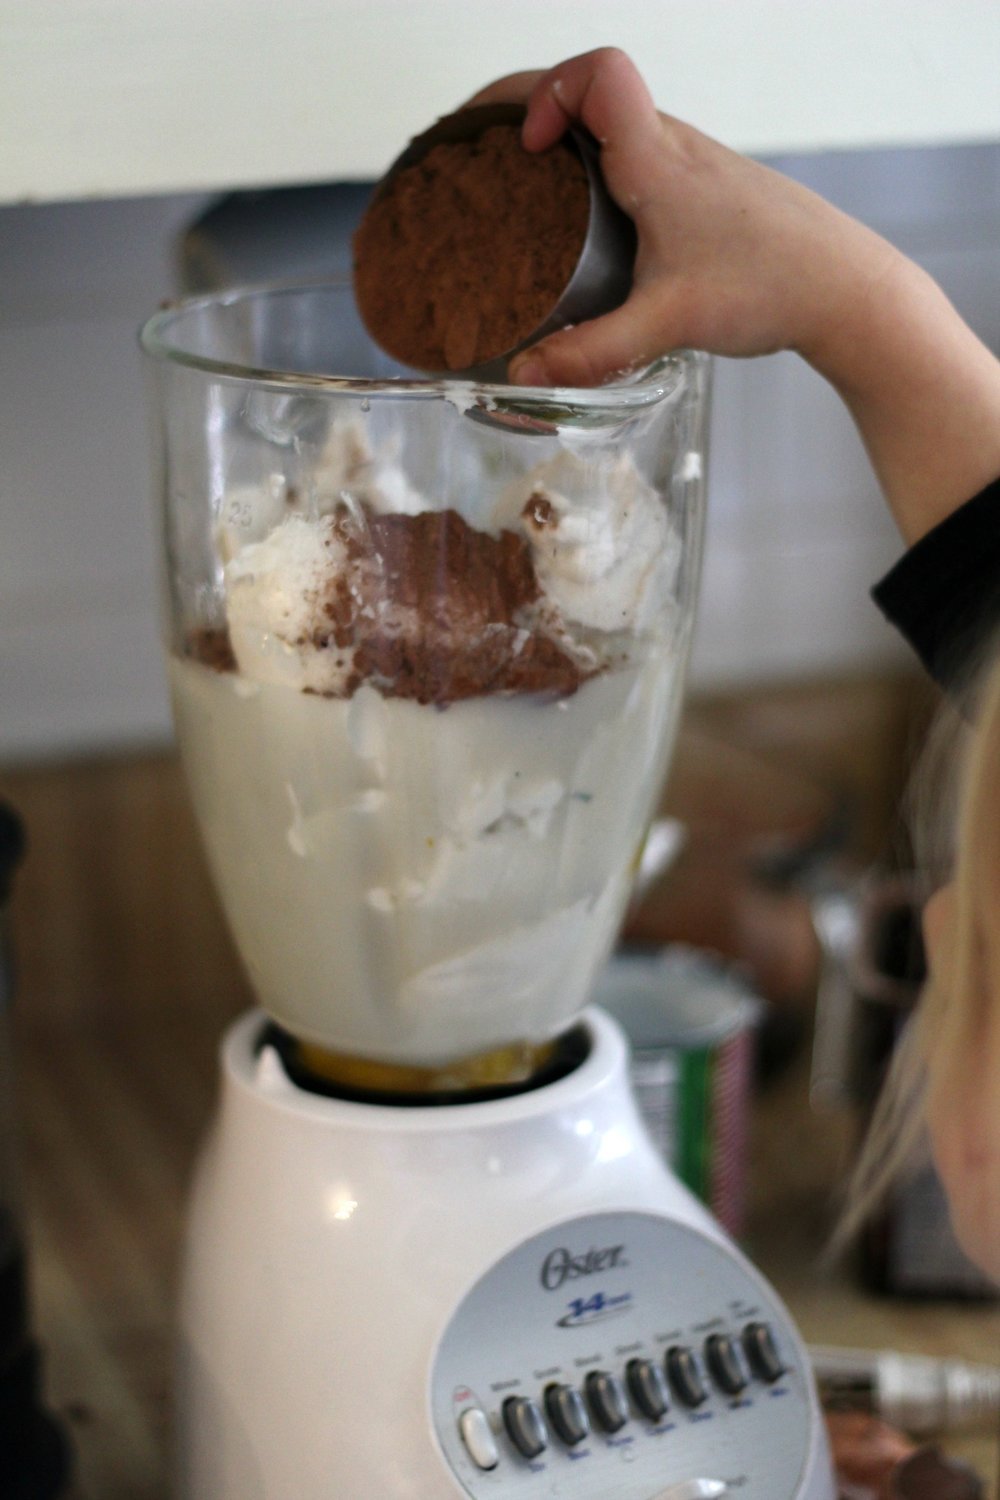 making homemade chocolate ice cream in a blender. Adding cocoa powder to remaining ingredients